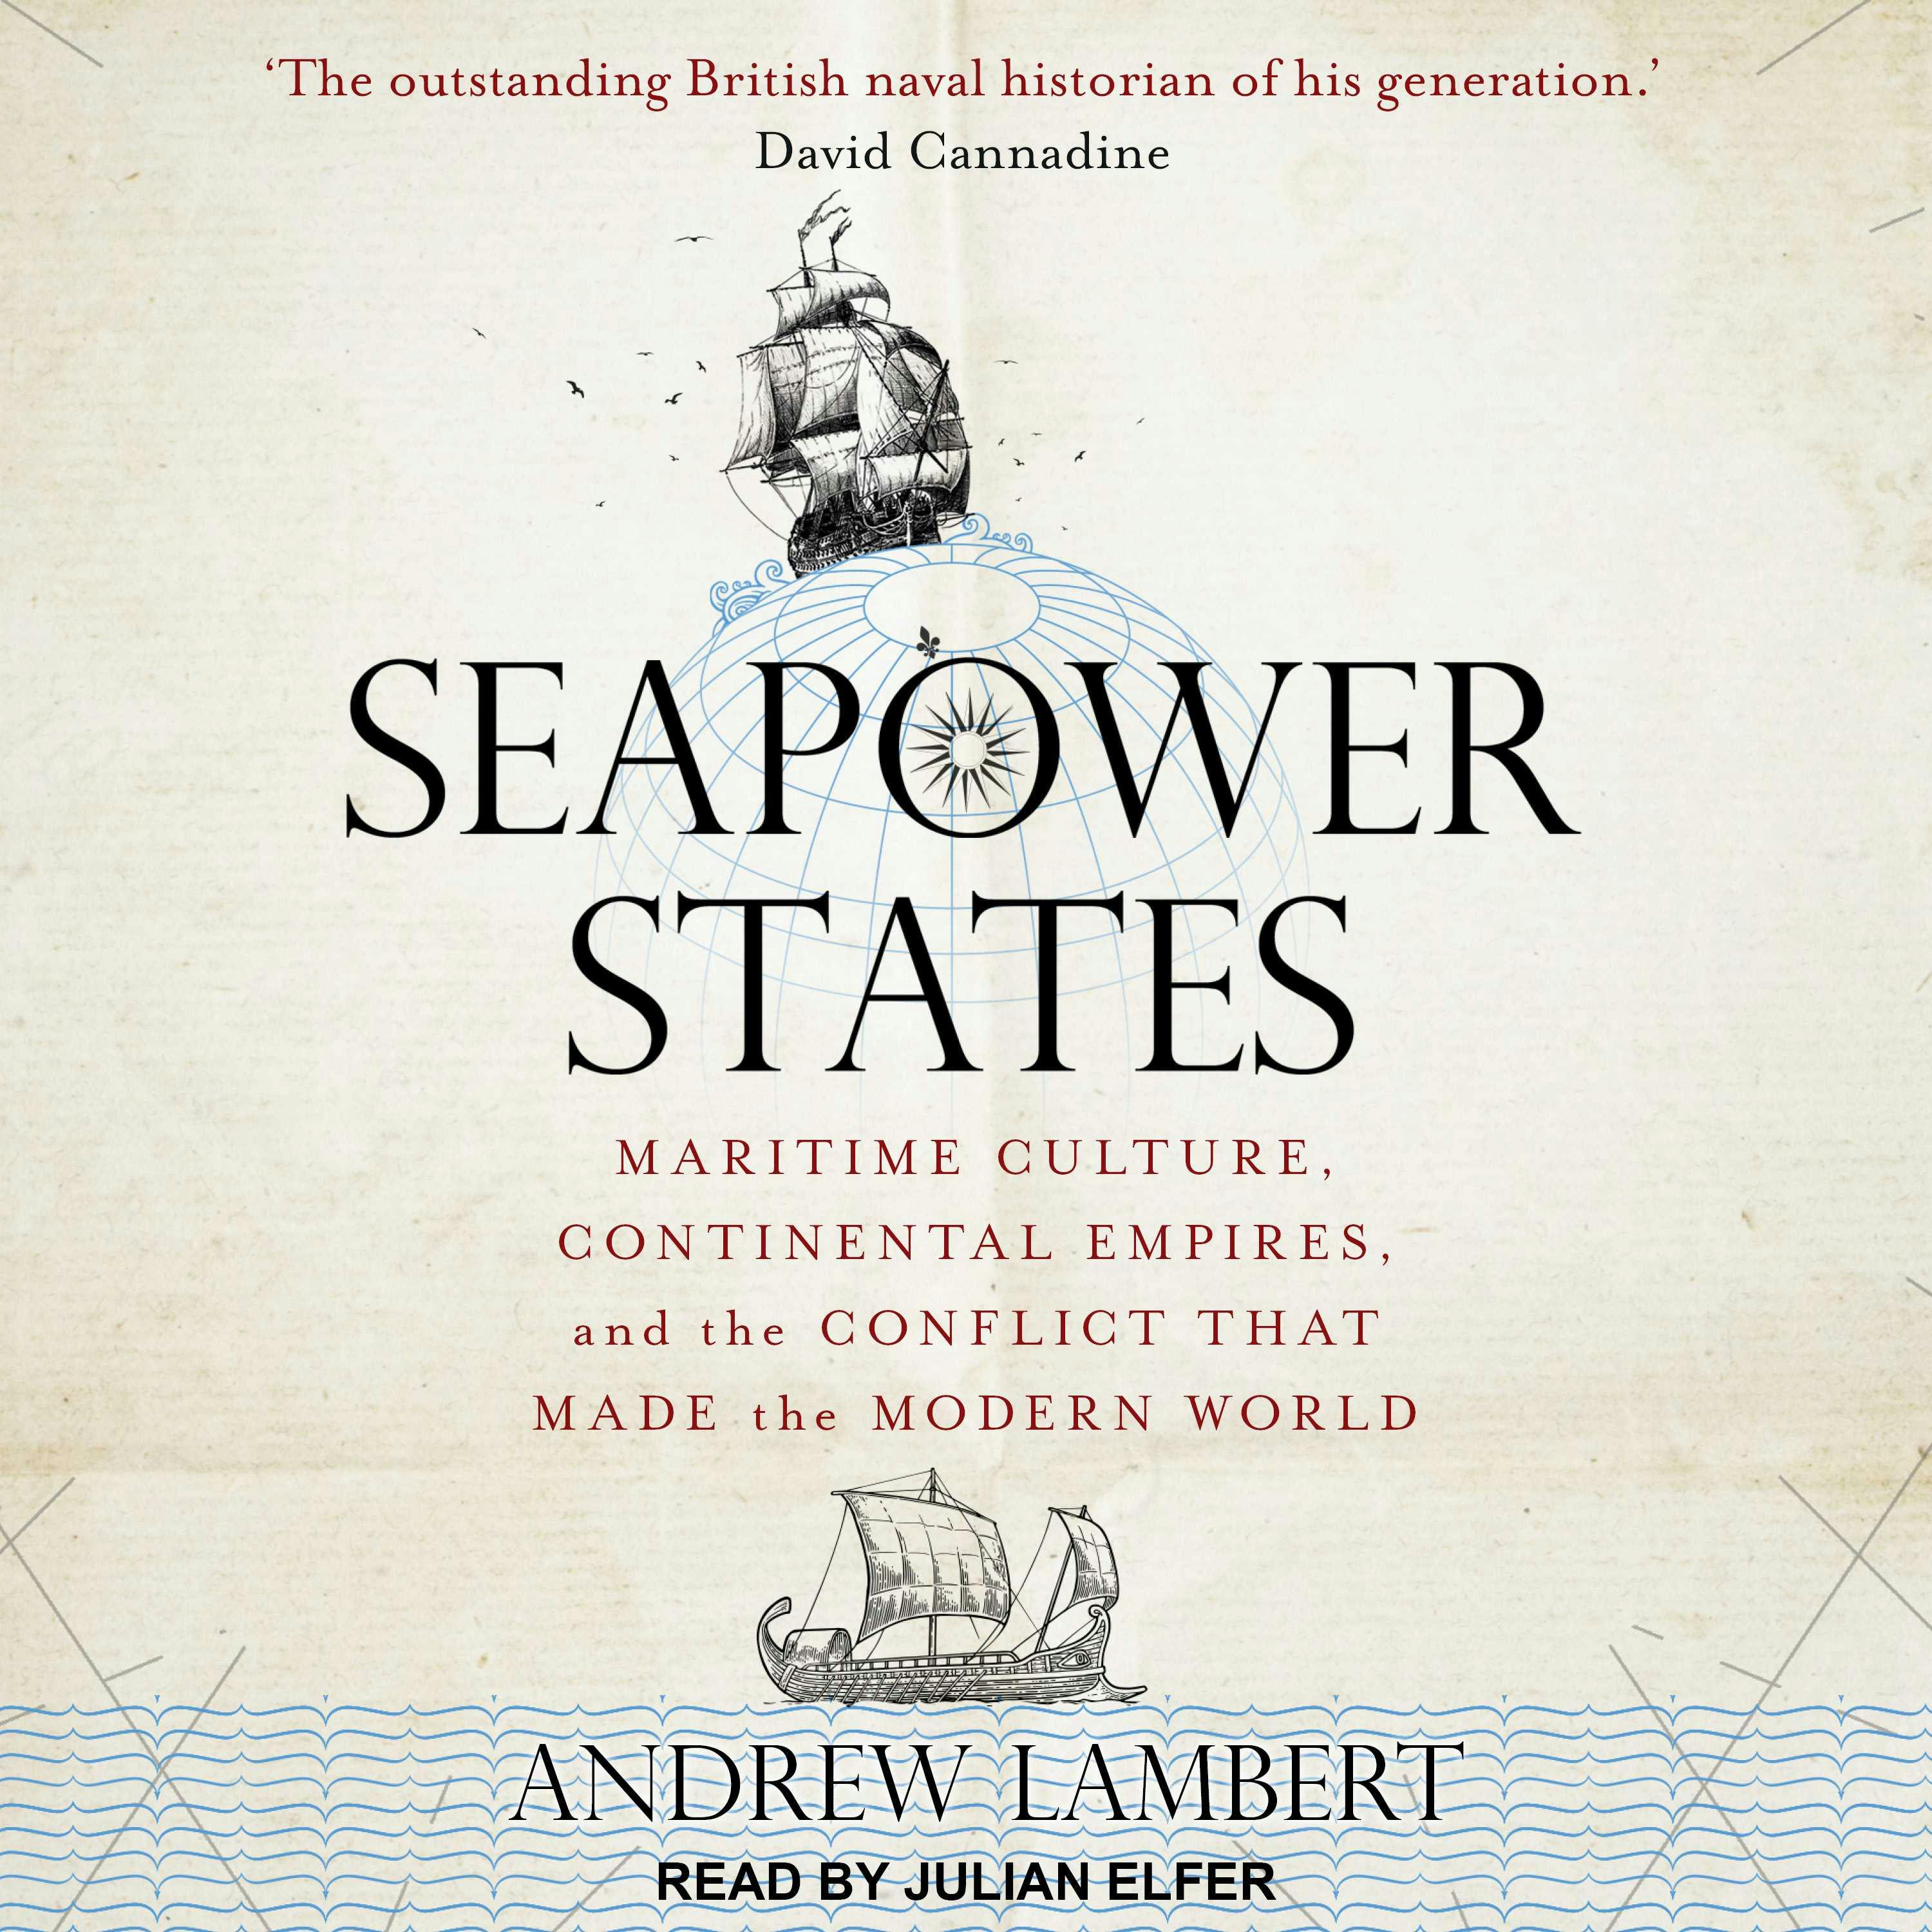 Seapower States: Maritime Culture, Continental Empires, and the Conflict That Made the Modern World - Andrew Lambert